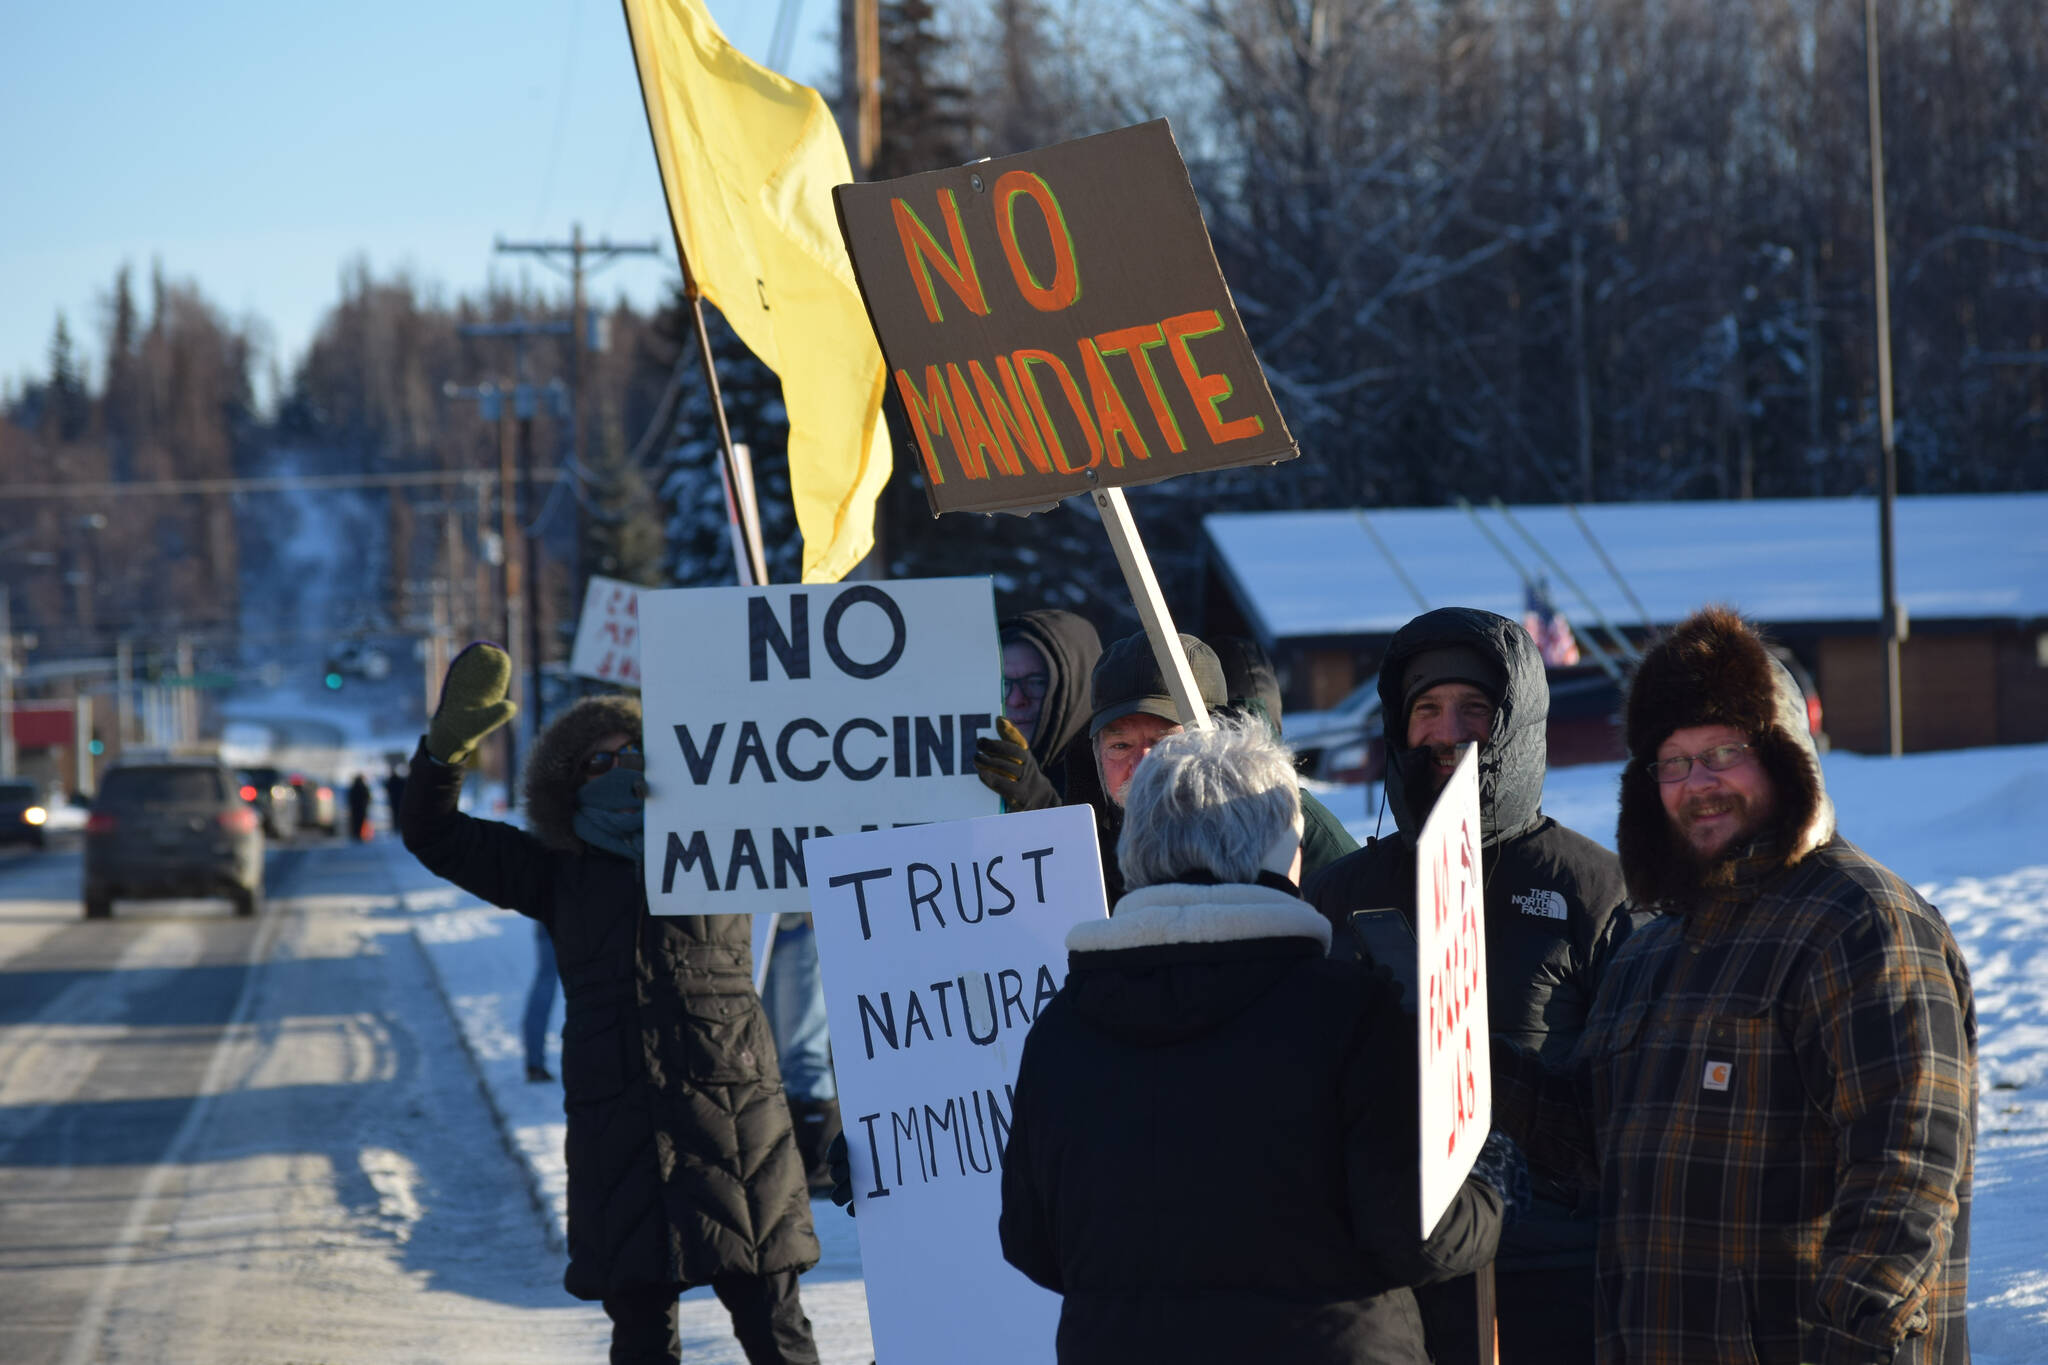 Demonstrators gather outside Central Peninsula Hospital in Soldotna to protest COVID-19 vaccine mandates and advocate for alternative treatments on Saturday, Nov. 20, 2021. (Camille Botello/Peninsula Clarion)